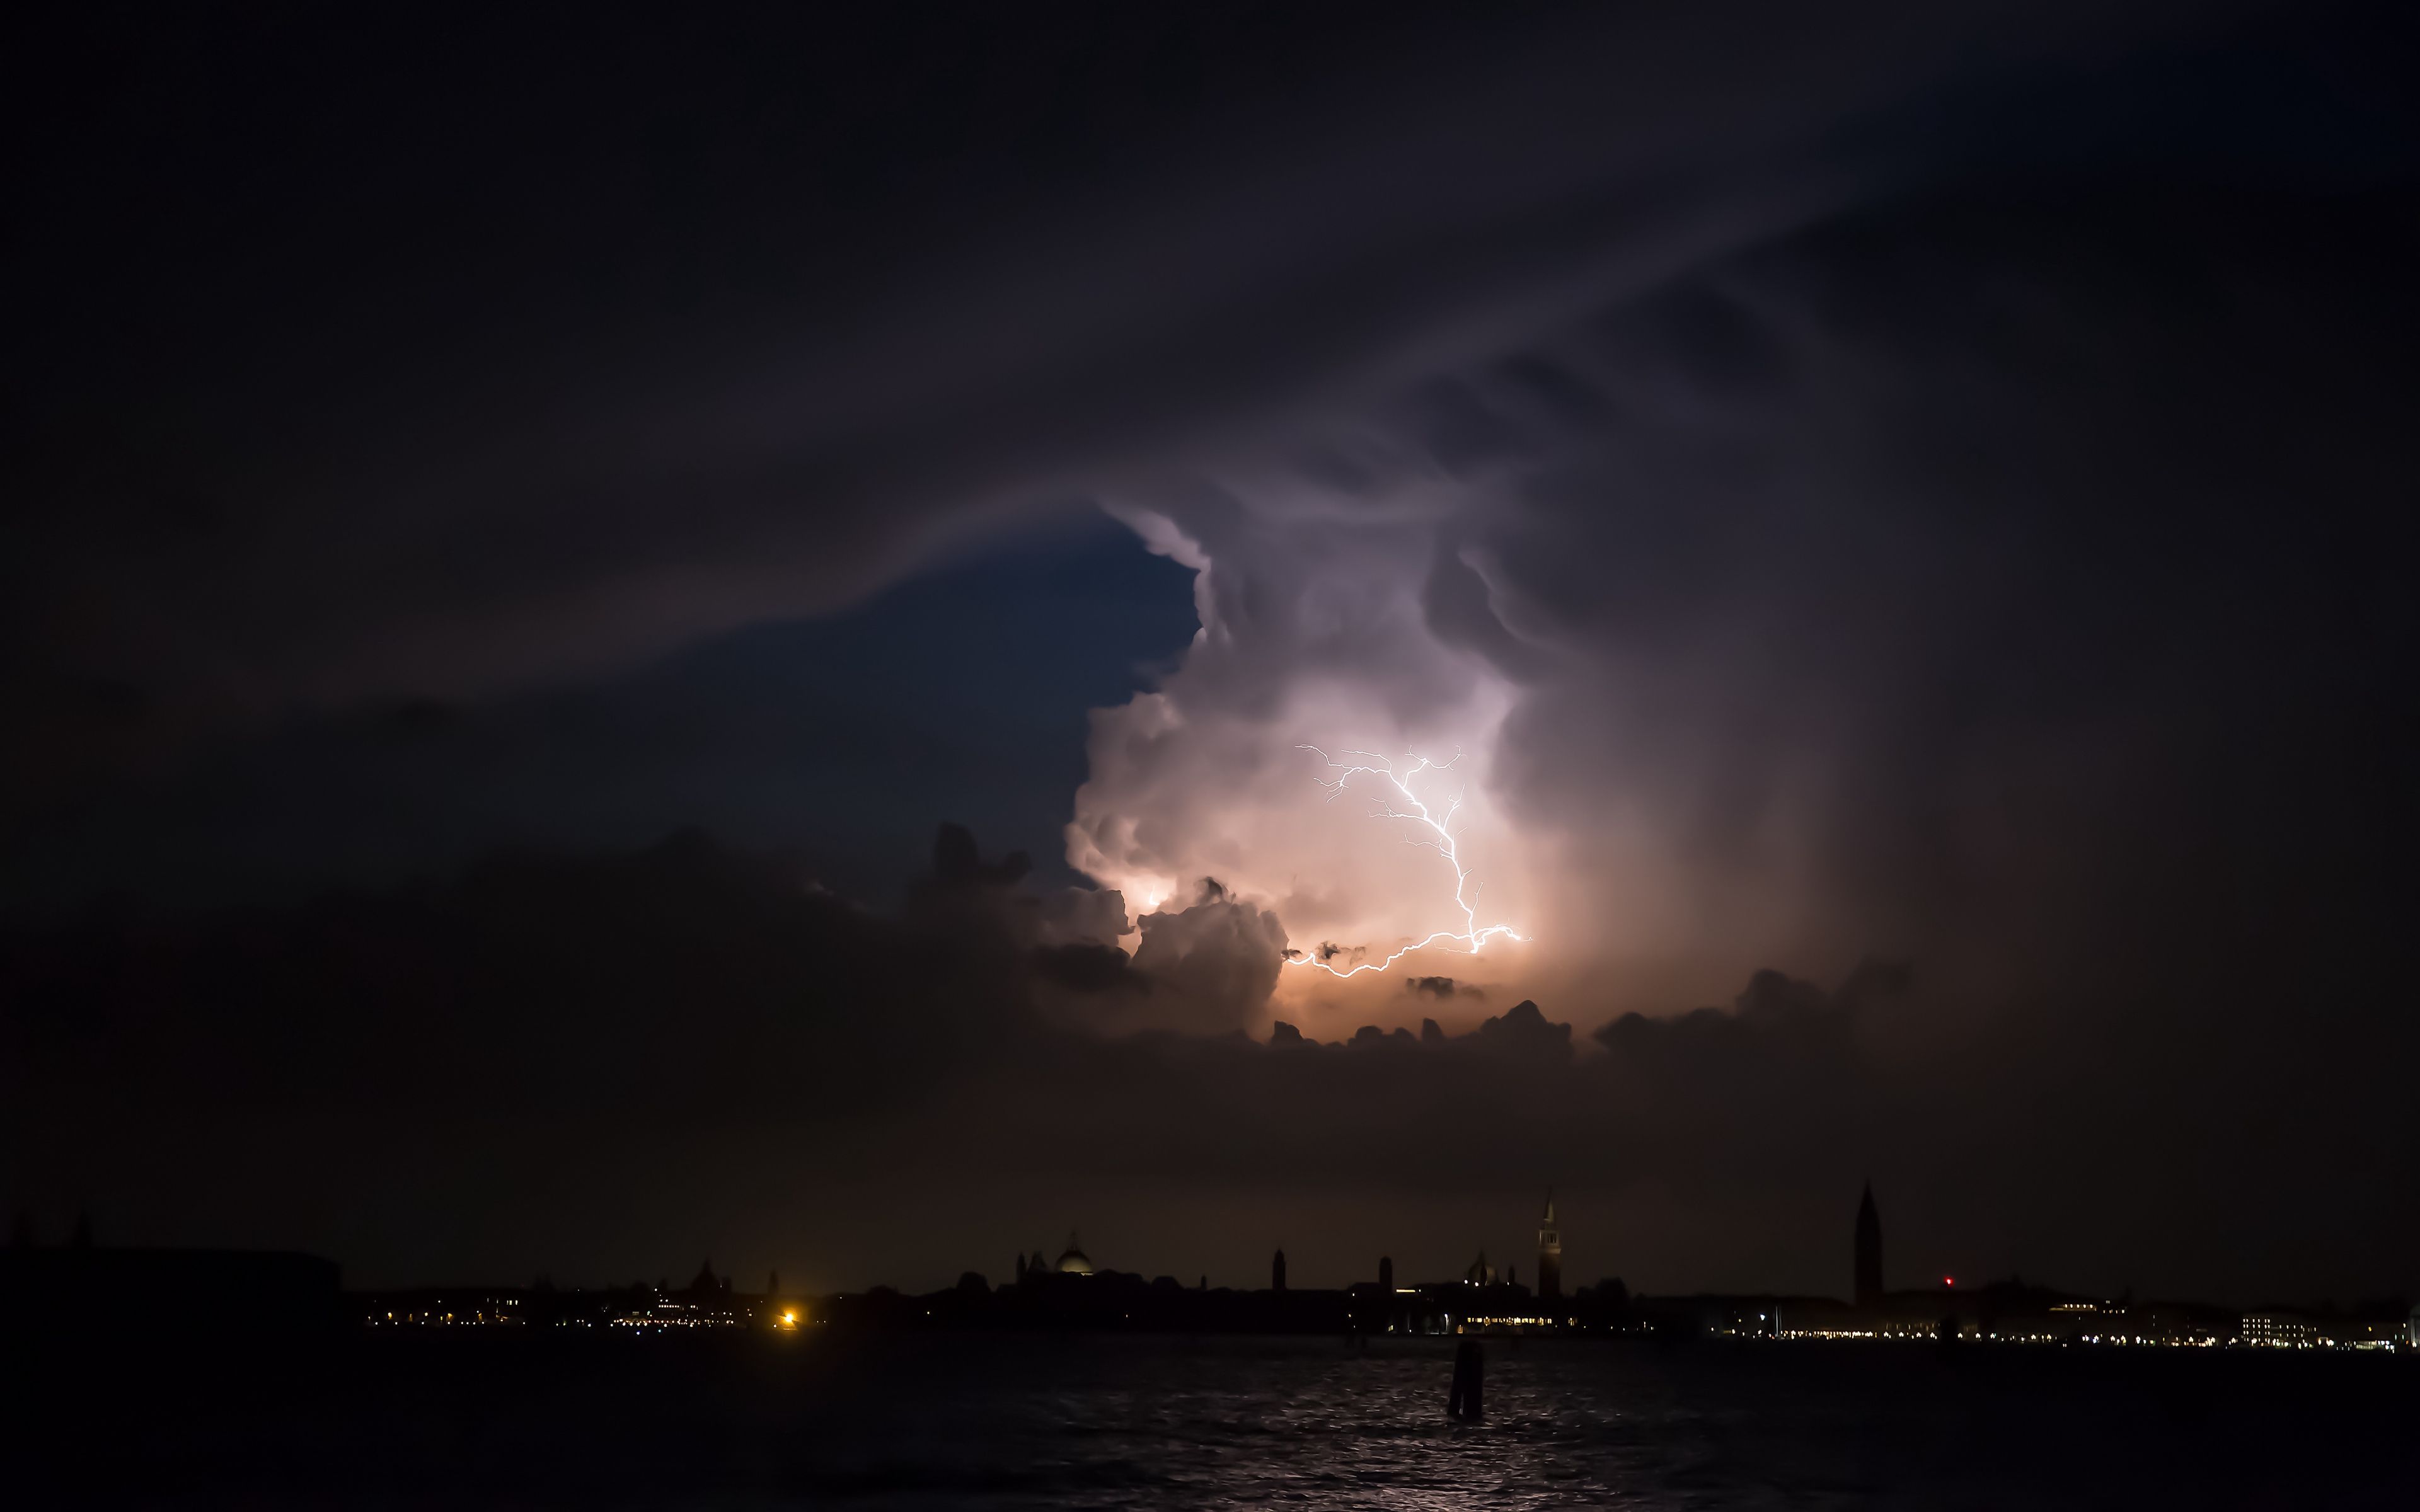 Free download Download wallpaper 3840x2400 clouds thunderstorm overcast city [3840x2400] for your Desktop, Mobile & Tablet. Explore Thunderstorm Wallpaper Downloads. Thunderstorm Desktop Wallpaper, Thunderstorm Live Wallpaper for PC, Thunderstorm